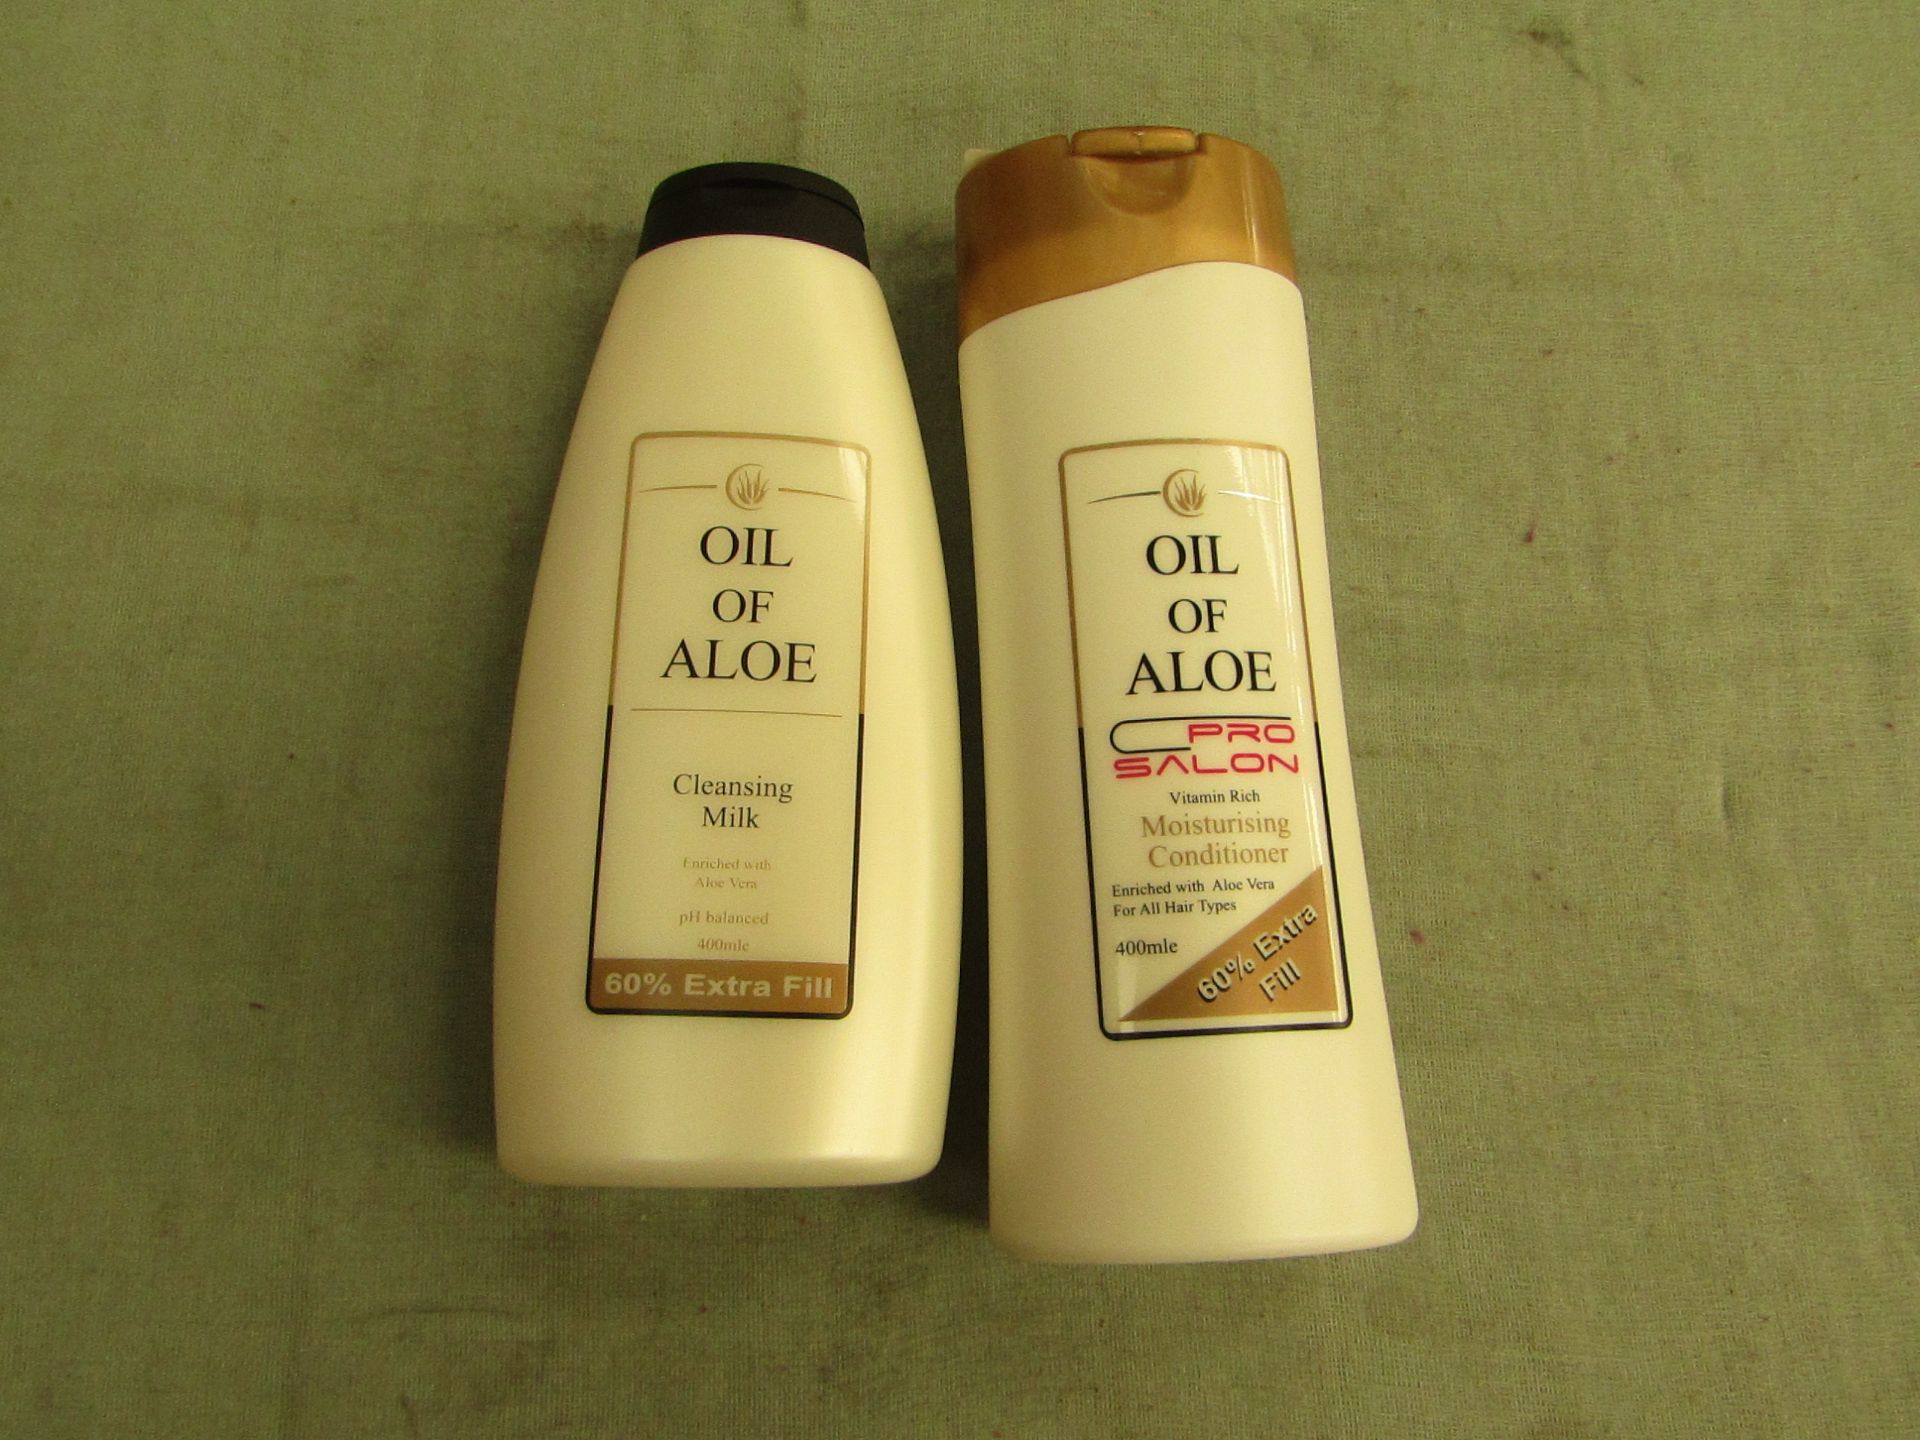 1x OIL OF ALOE - Cleansing Milk Enriched With Aloe Vera - 400ml - New. 1x OIL OF ALOE - Pro Salon